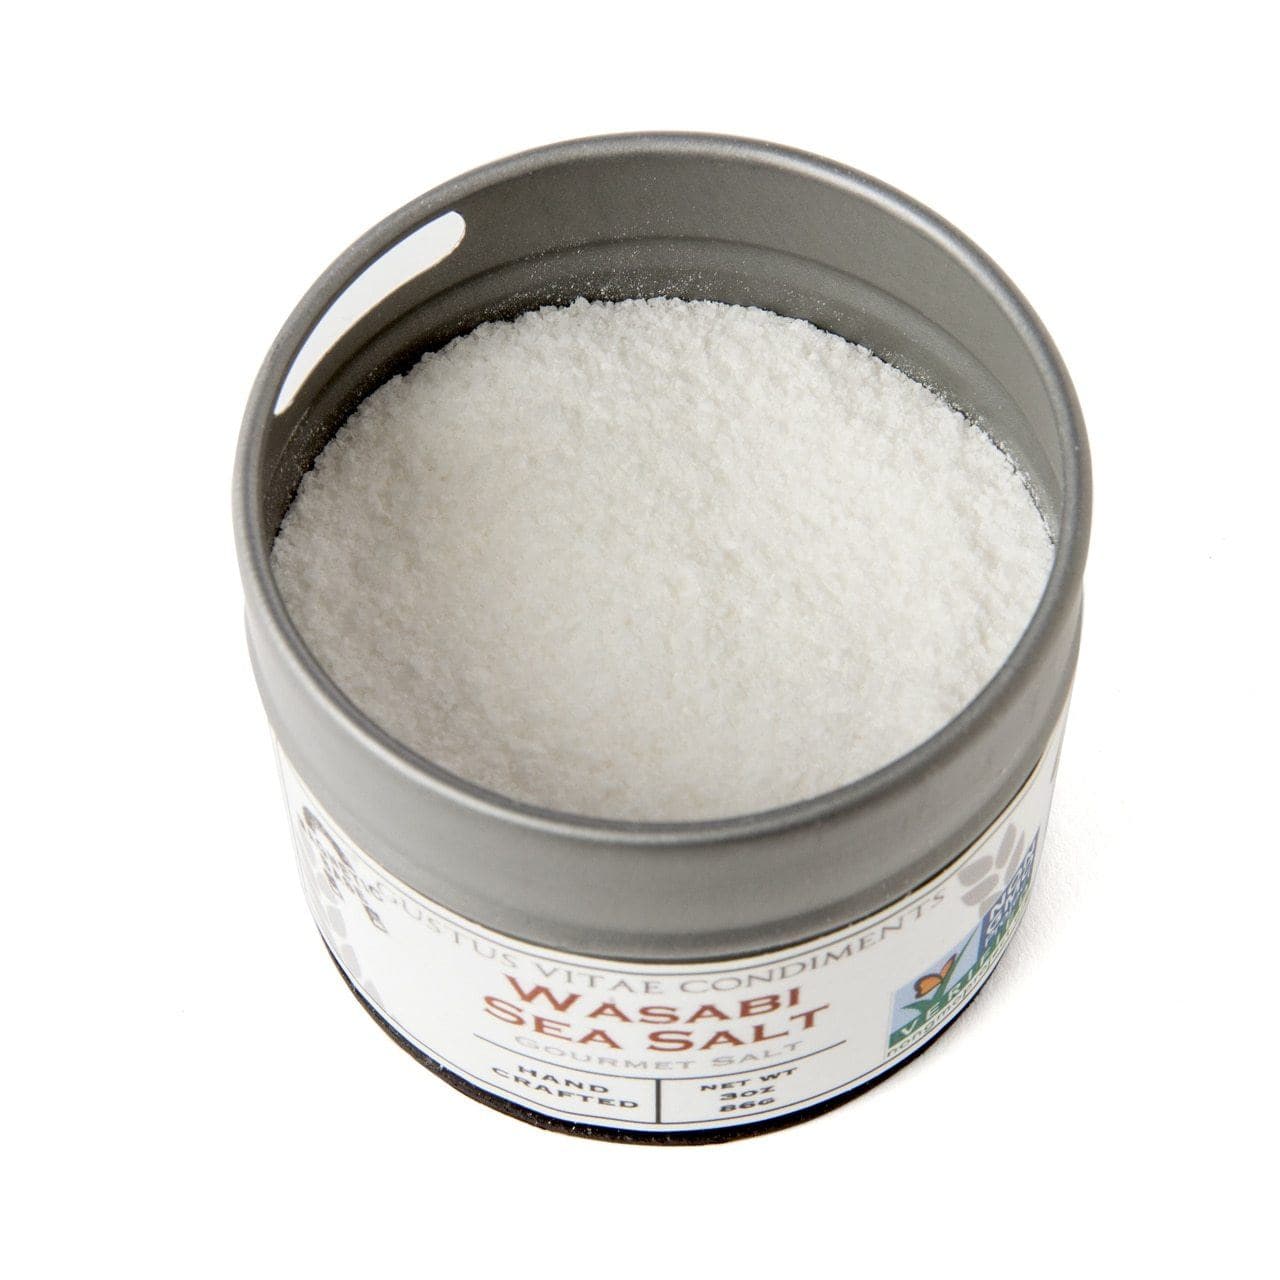 Gift-Spicy Sea Salts I 6pc.